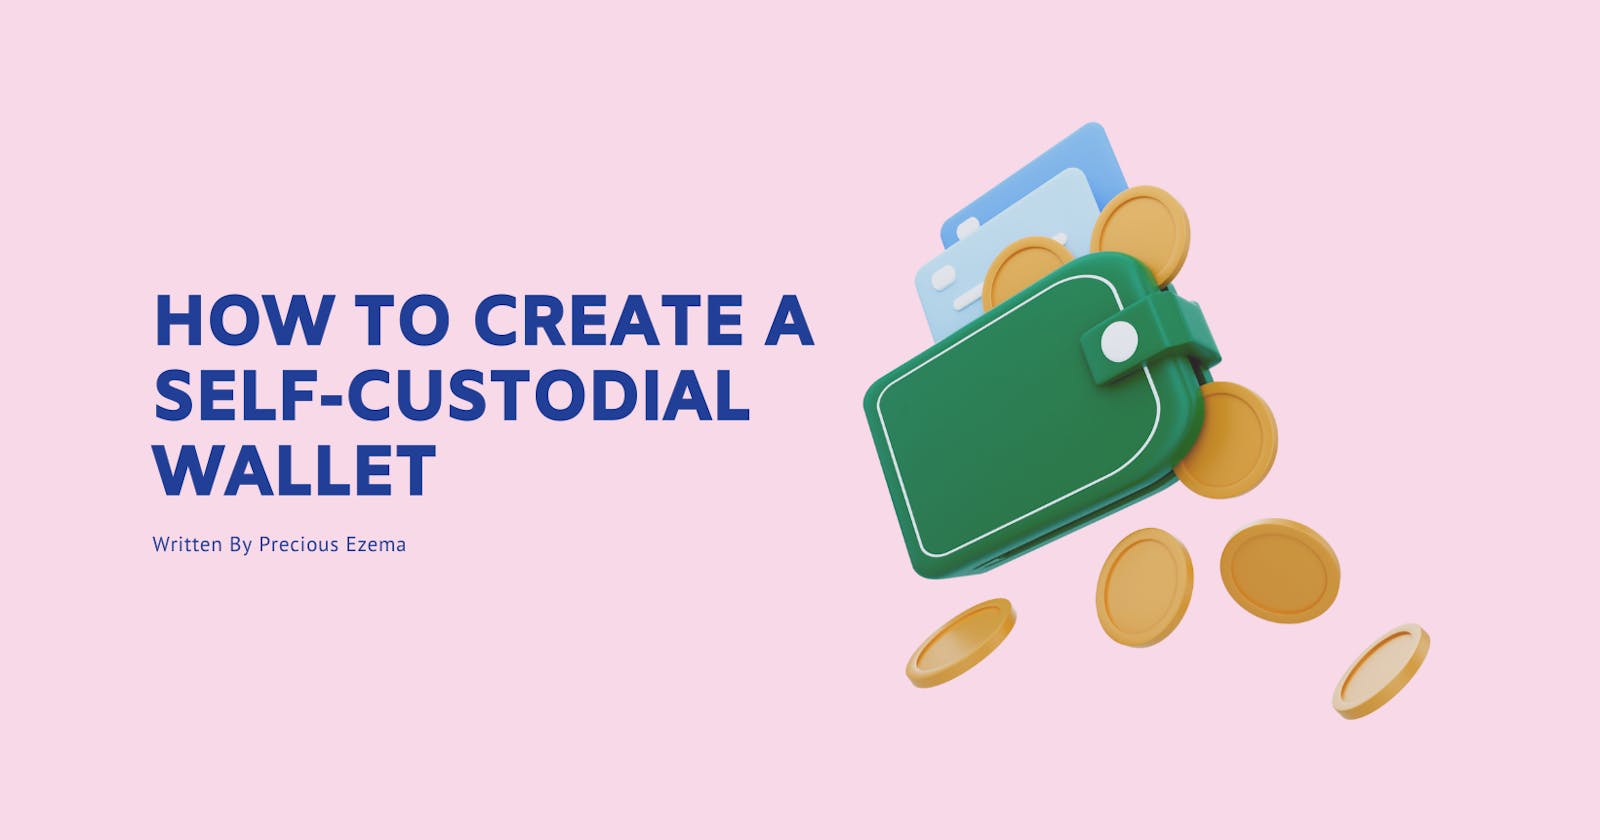 How To Create A Self -custodial Wallet